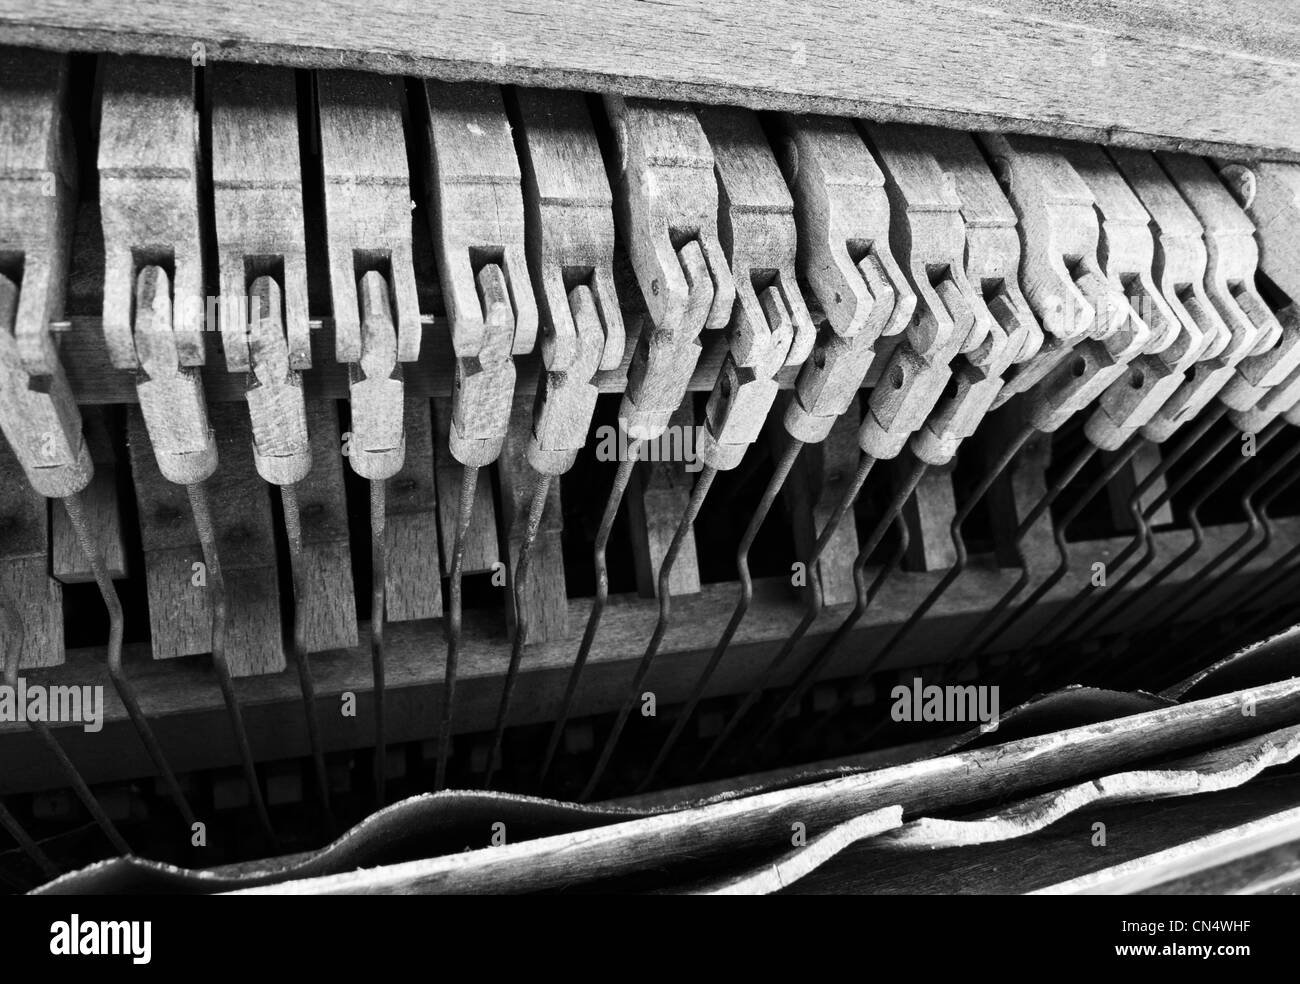 Hammers inside very dilapidated, broken down upright piano. Stock Photo